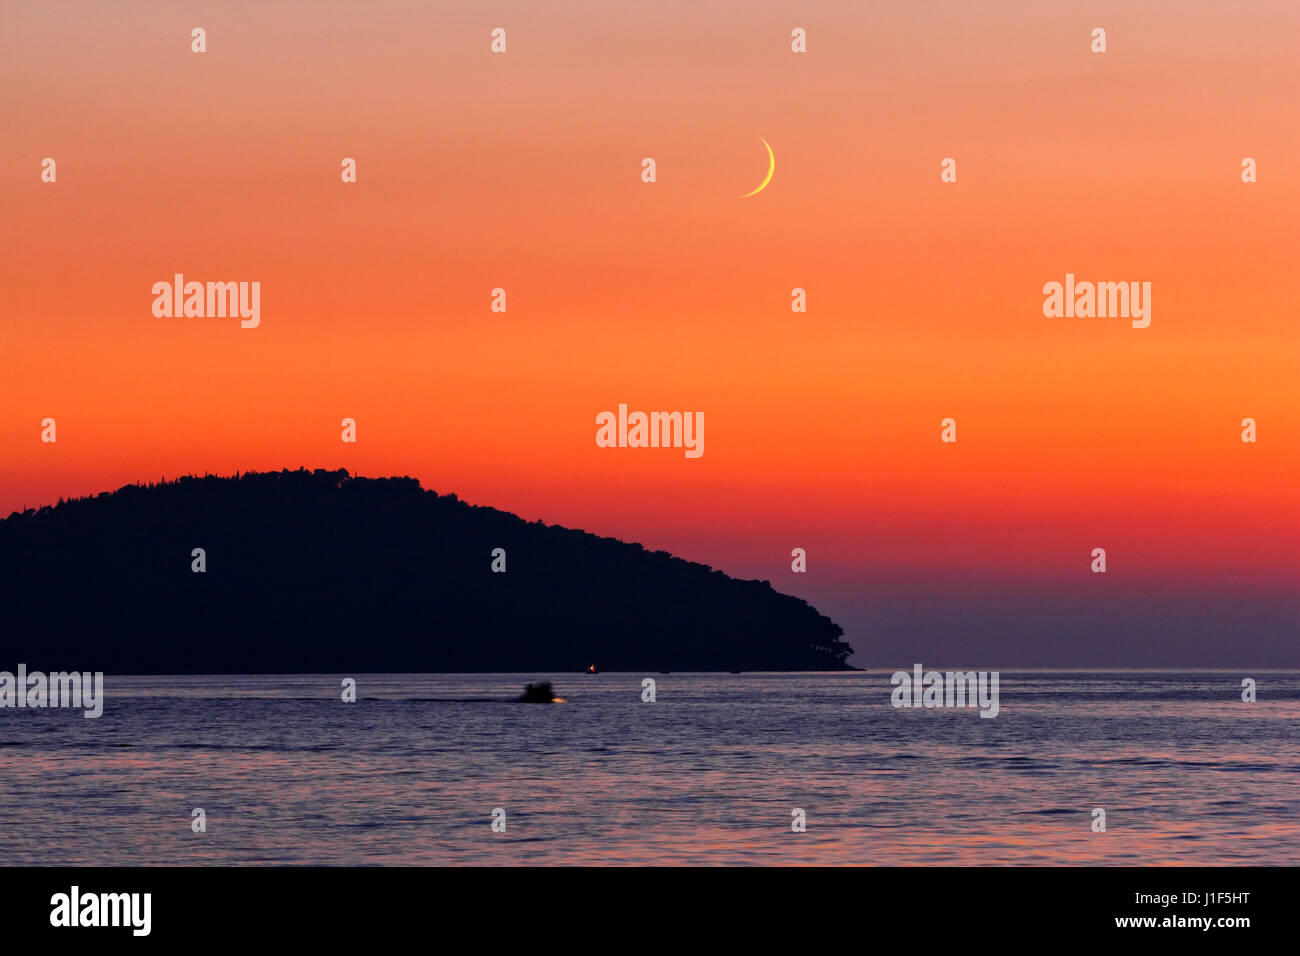 Sunset on island Korcula in Croatia with crescent moon on the sky Stock Photo